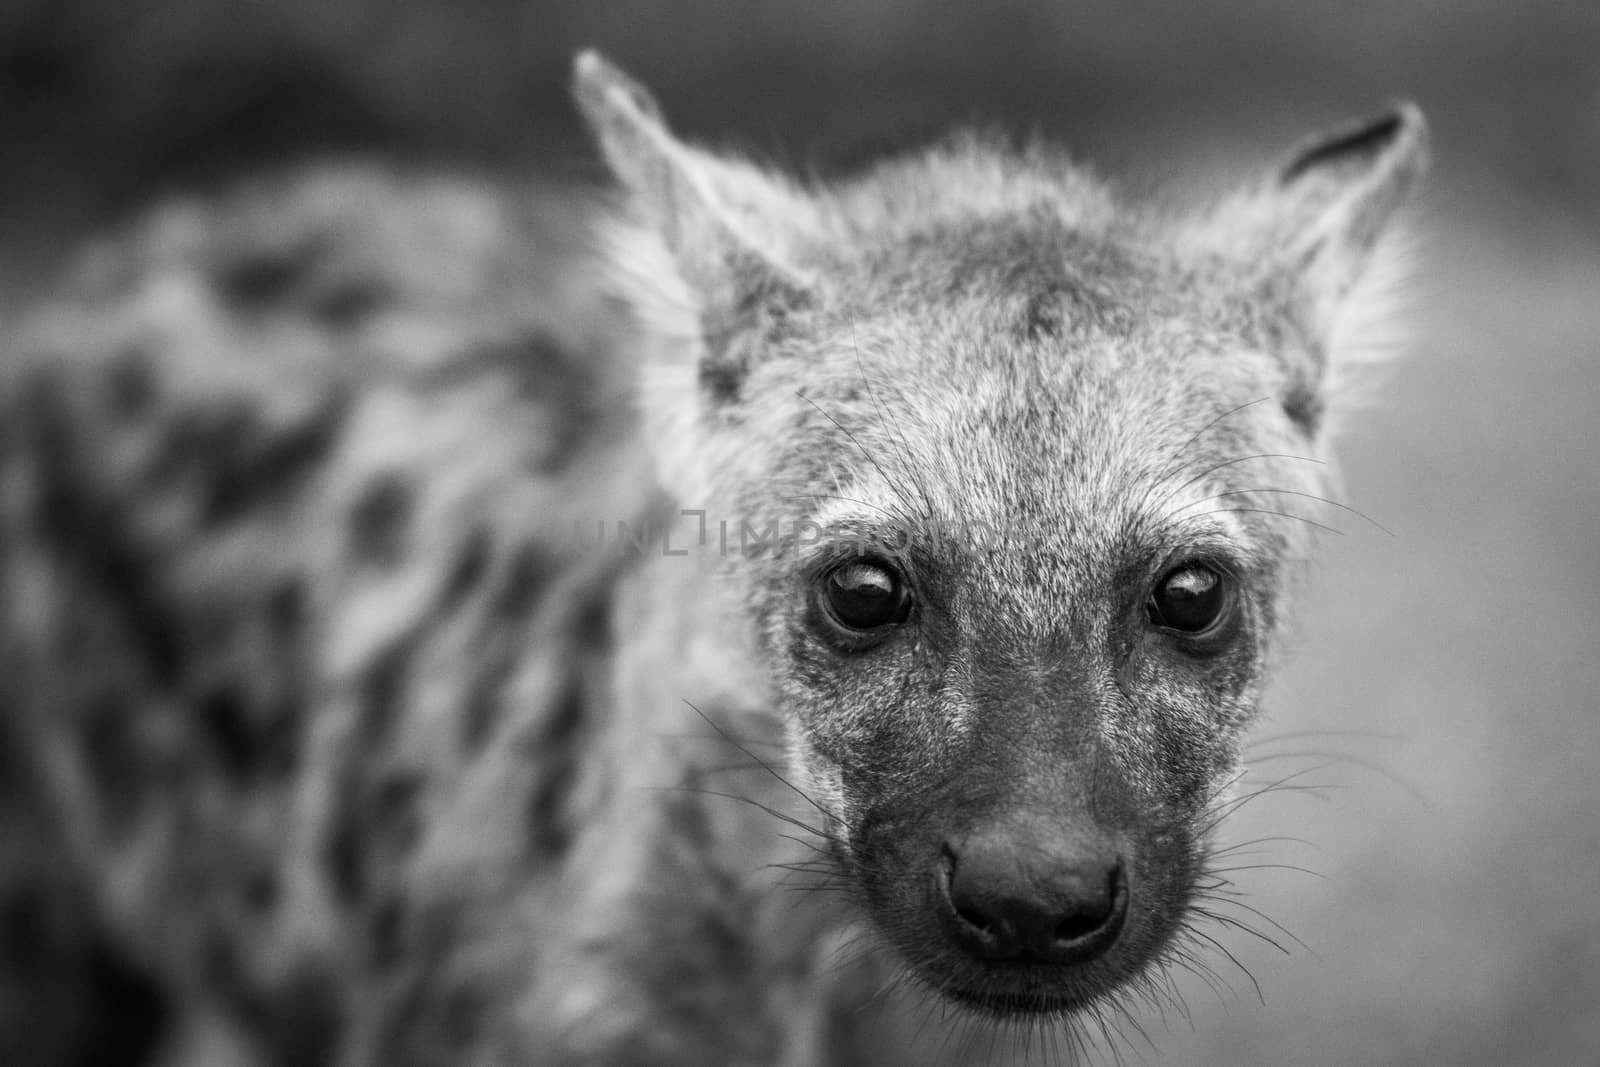 Starring Spotted hyena cub in black and white in the Kruger National Park, South Africa. by Simoneemanphotography